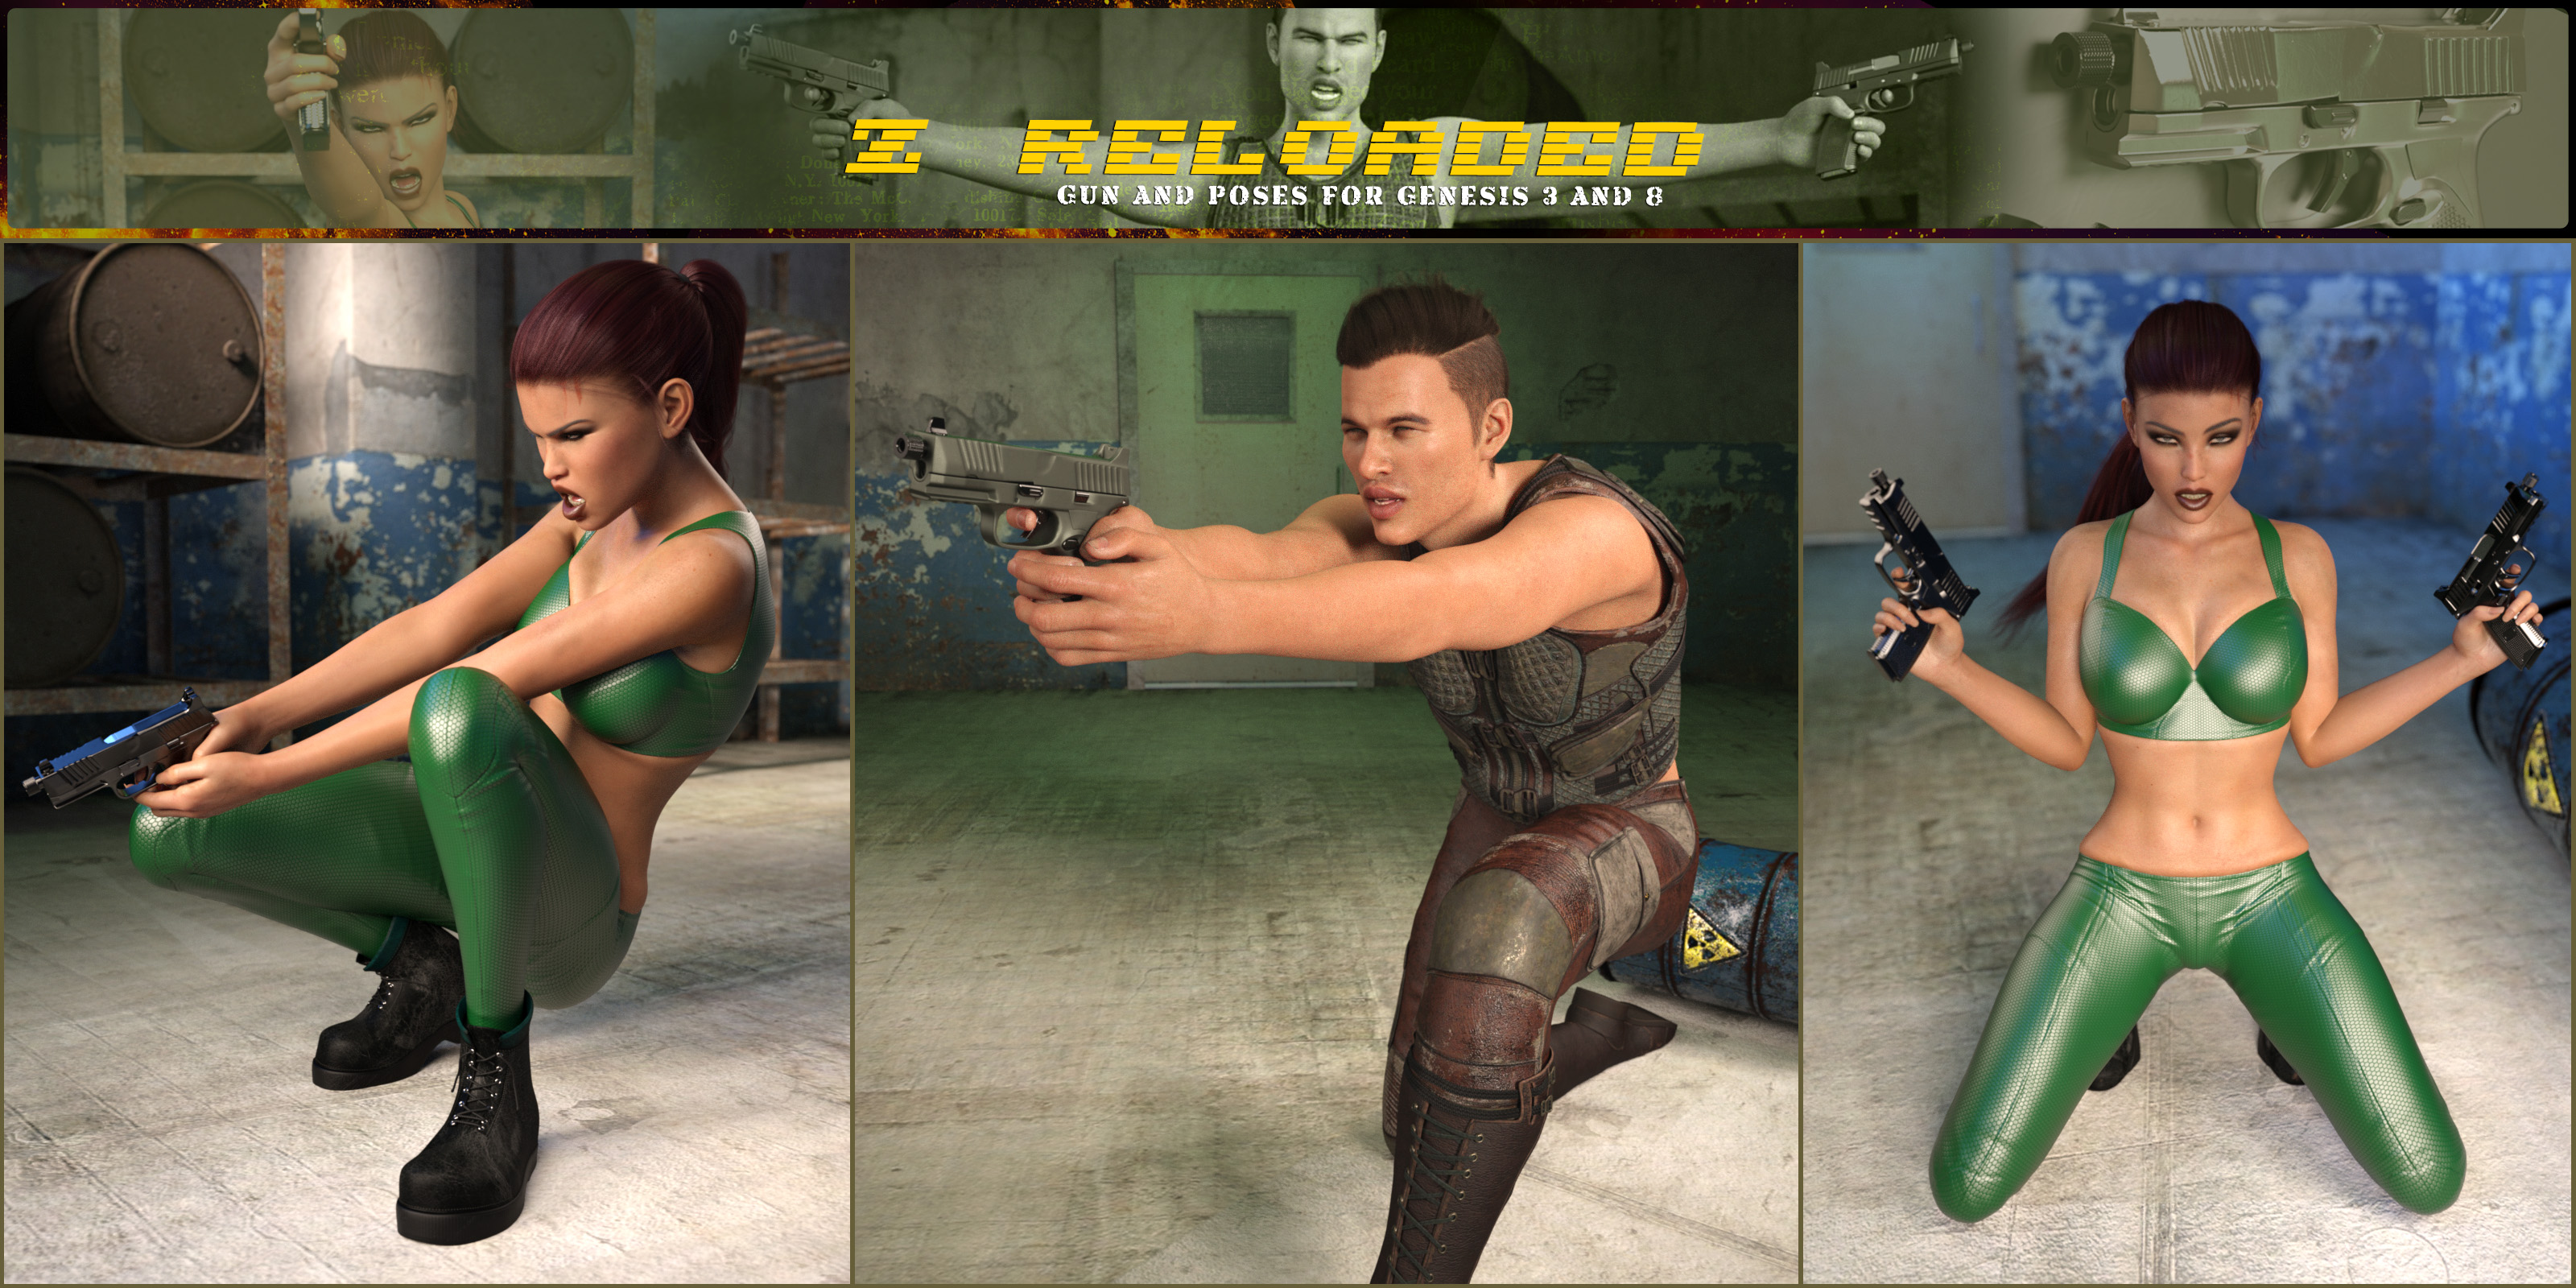 Z Reloaded Gun and Poses for Genesis 3 and 8 by: Zeddicuss, 3D Models by Daz 3D